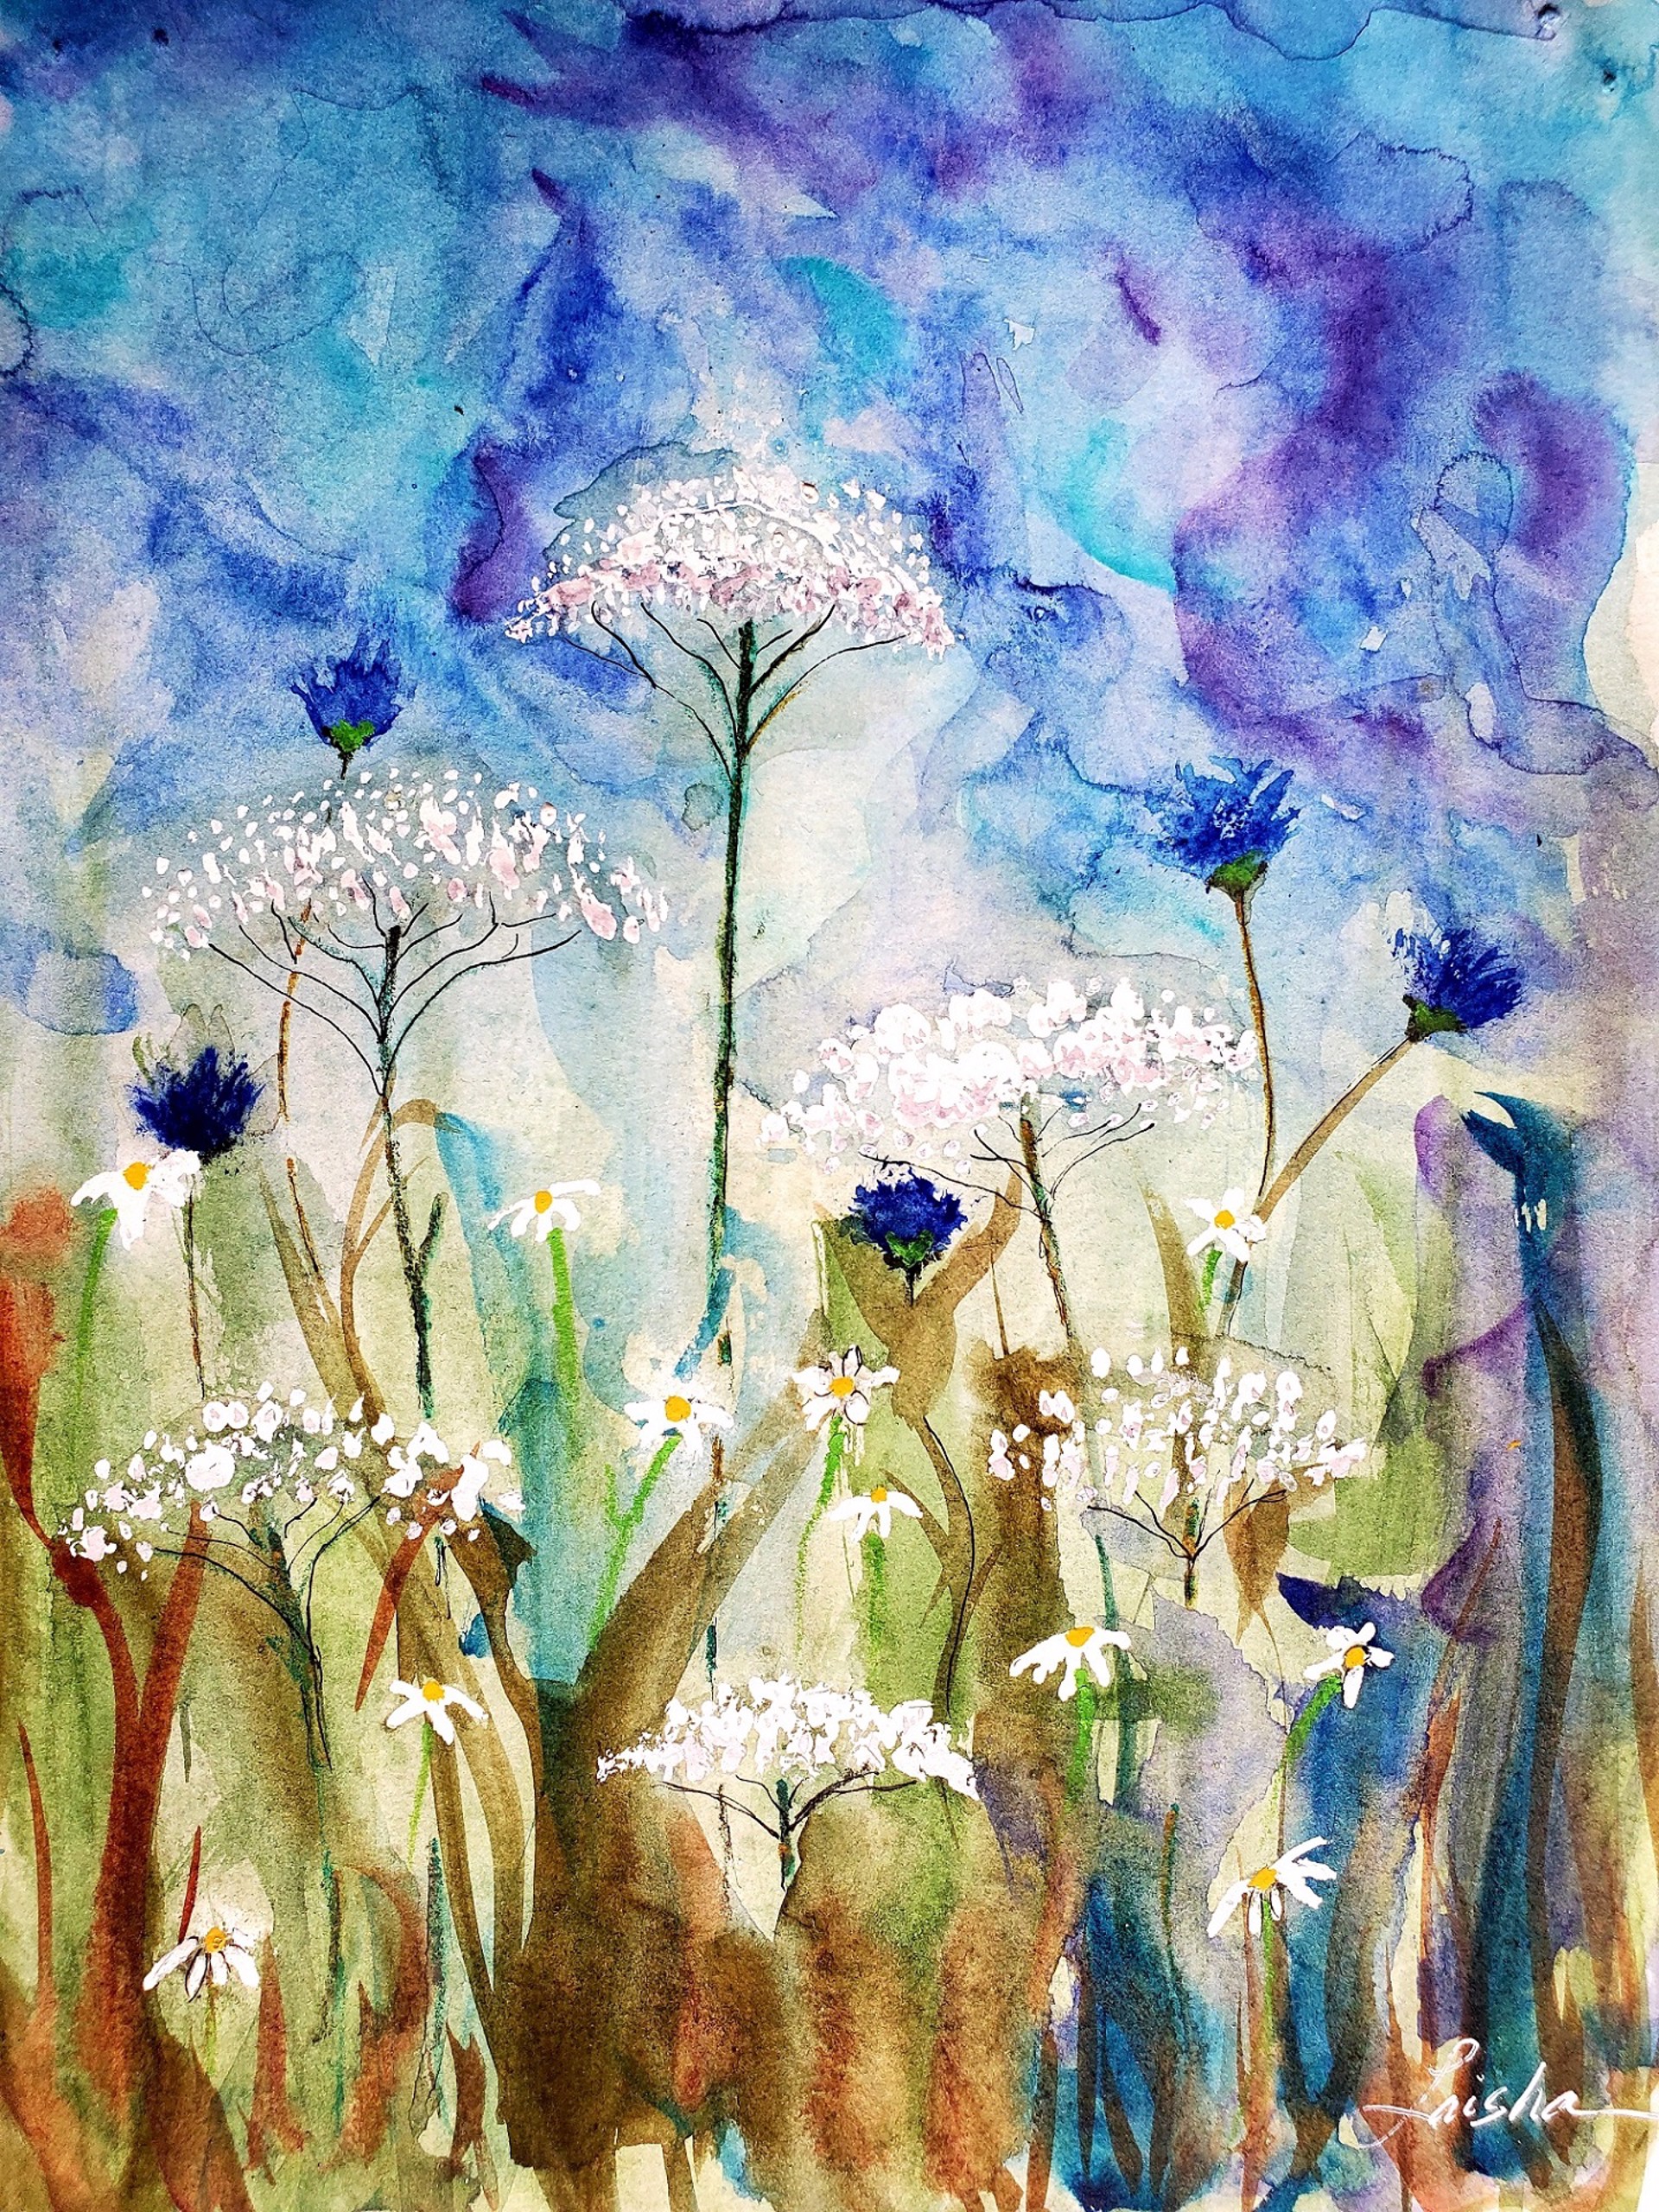 Corn Flowers and Lace by Laisha Kneuven